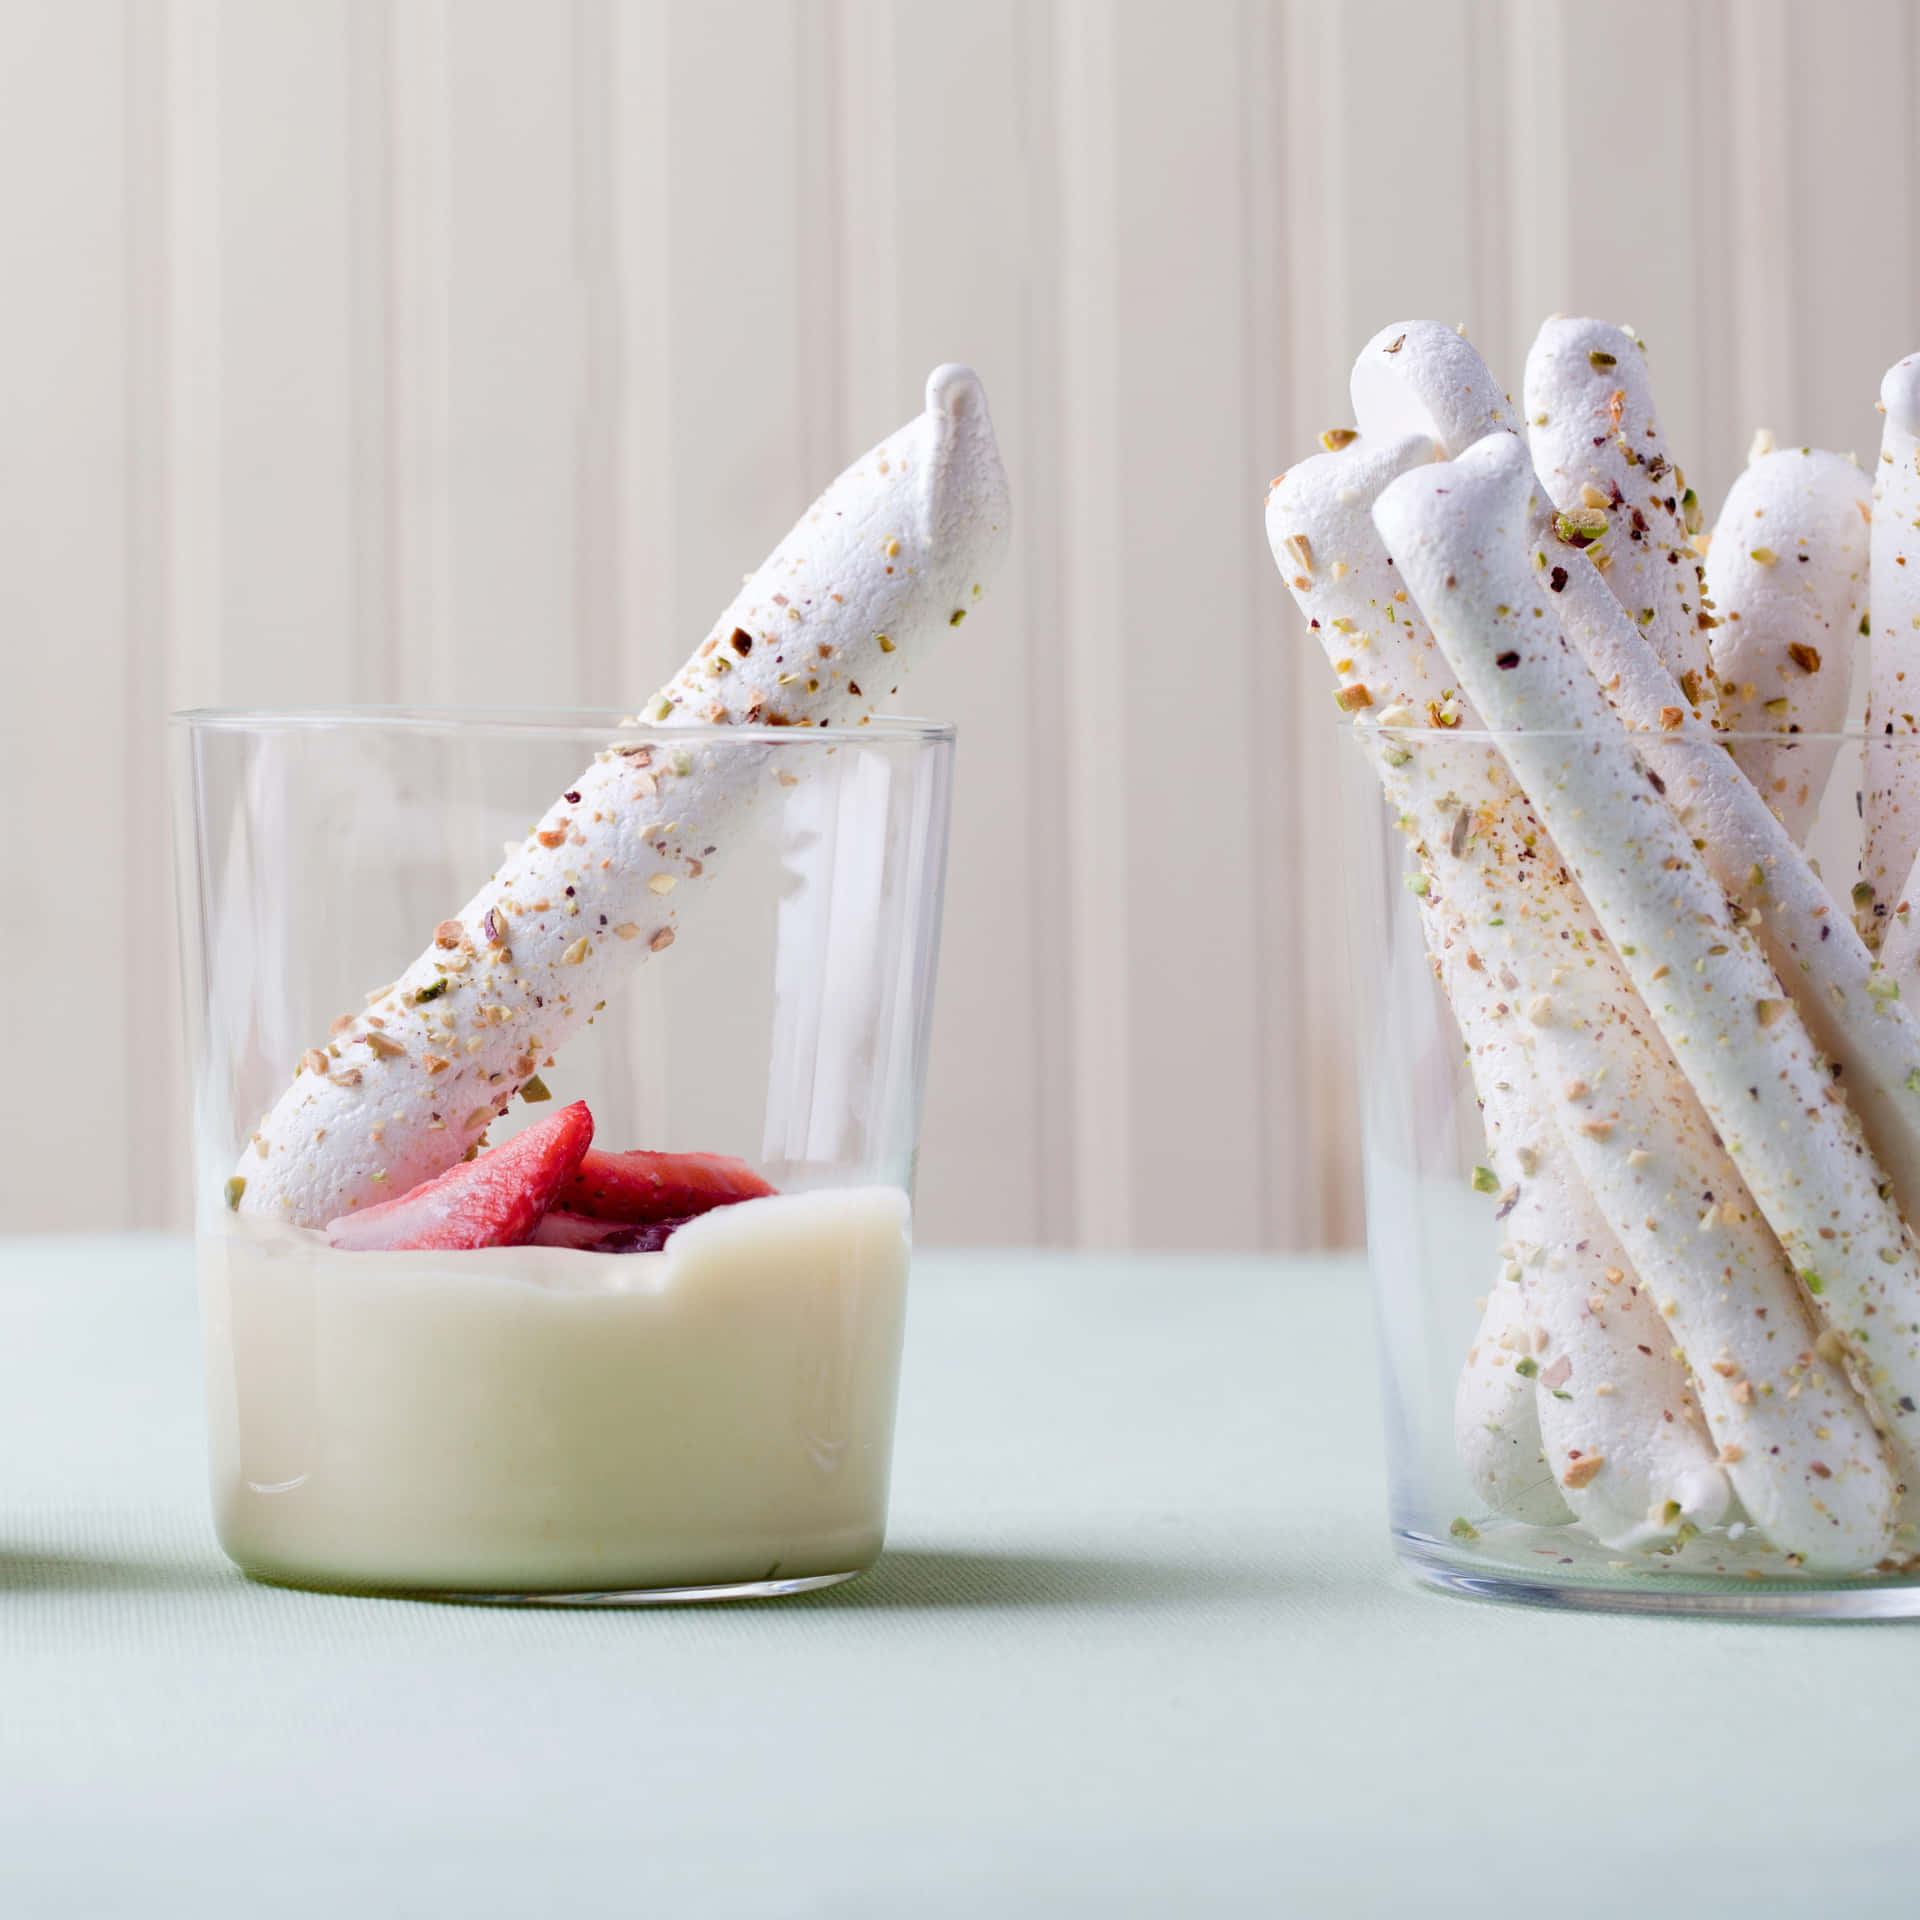 Enjoy the light and fluffy sweetness of a delicious Meringue dessert. Wallpaper